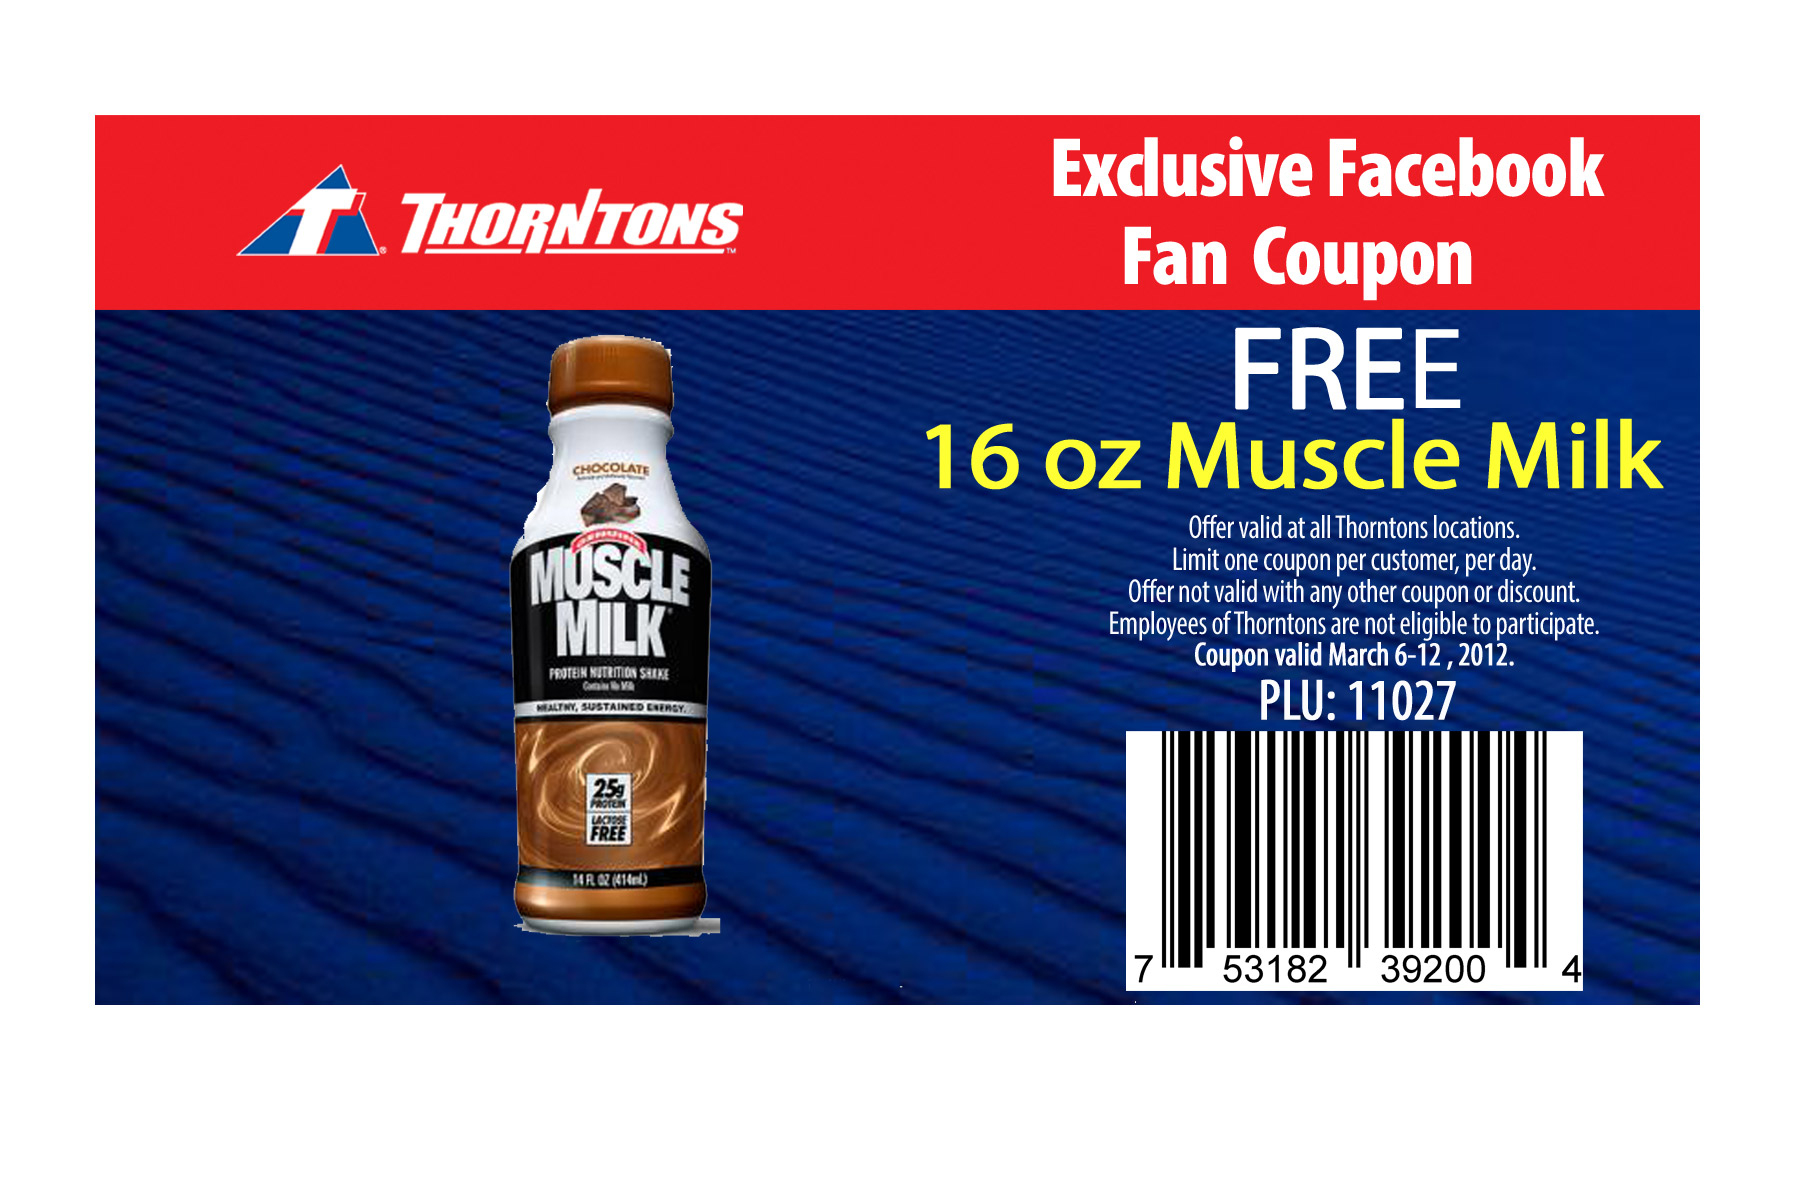 Free 16 Oz Muscle Milk At Thorntons - Free Milk Coupons Printable